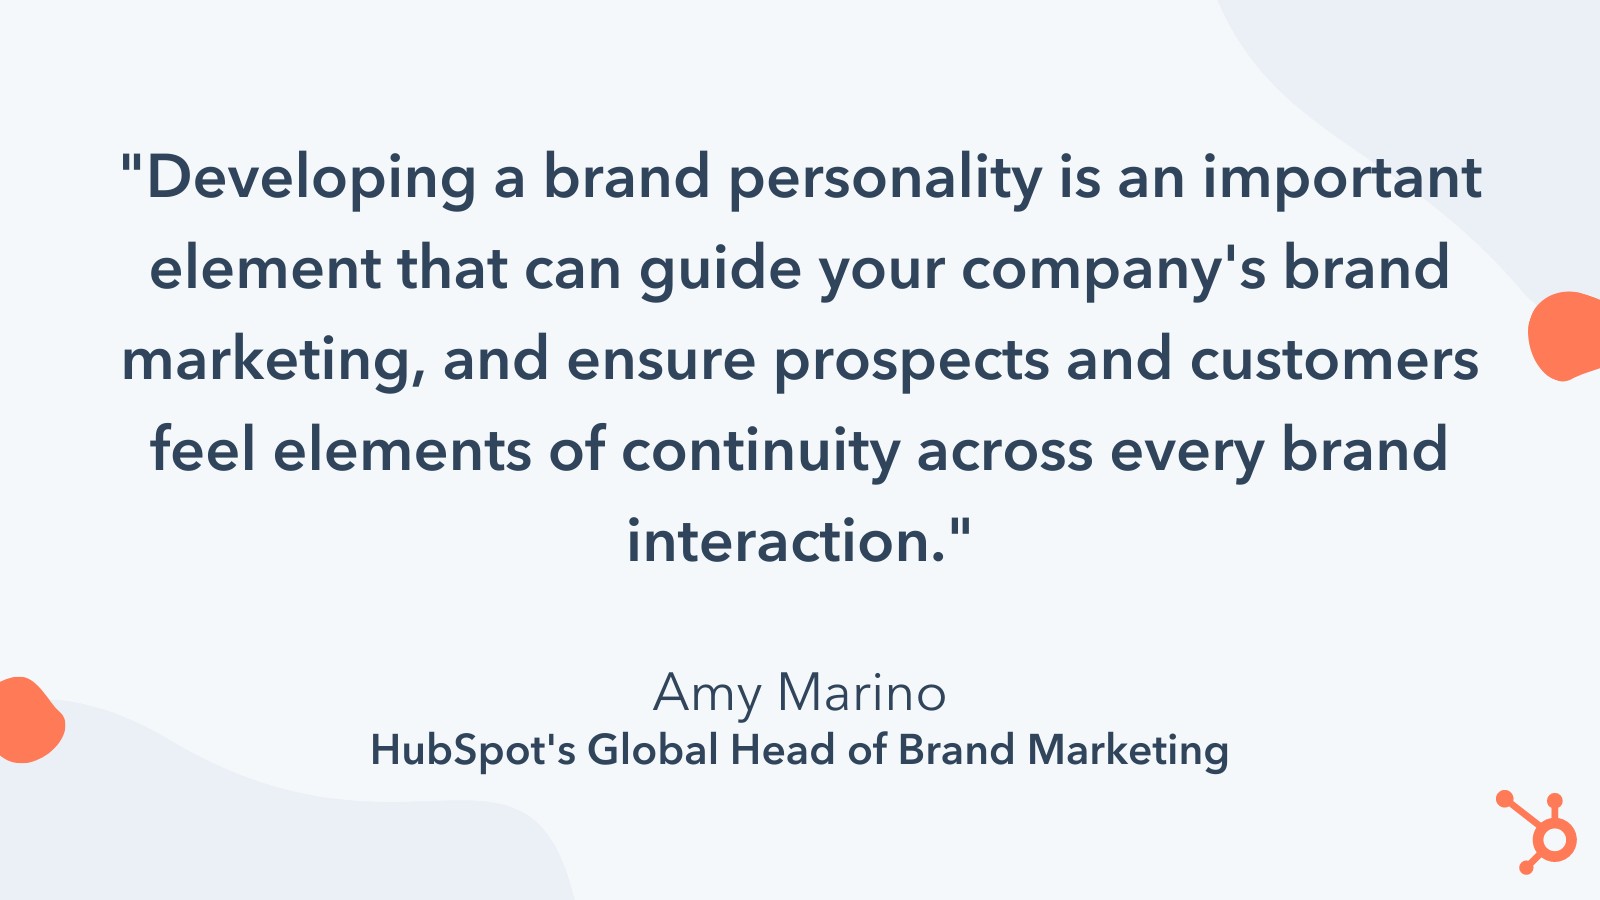 what is brand personality according to hubspot global head of brand marketing